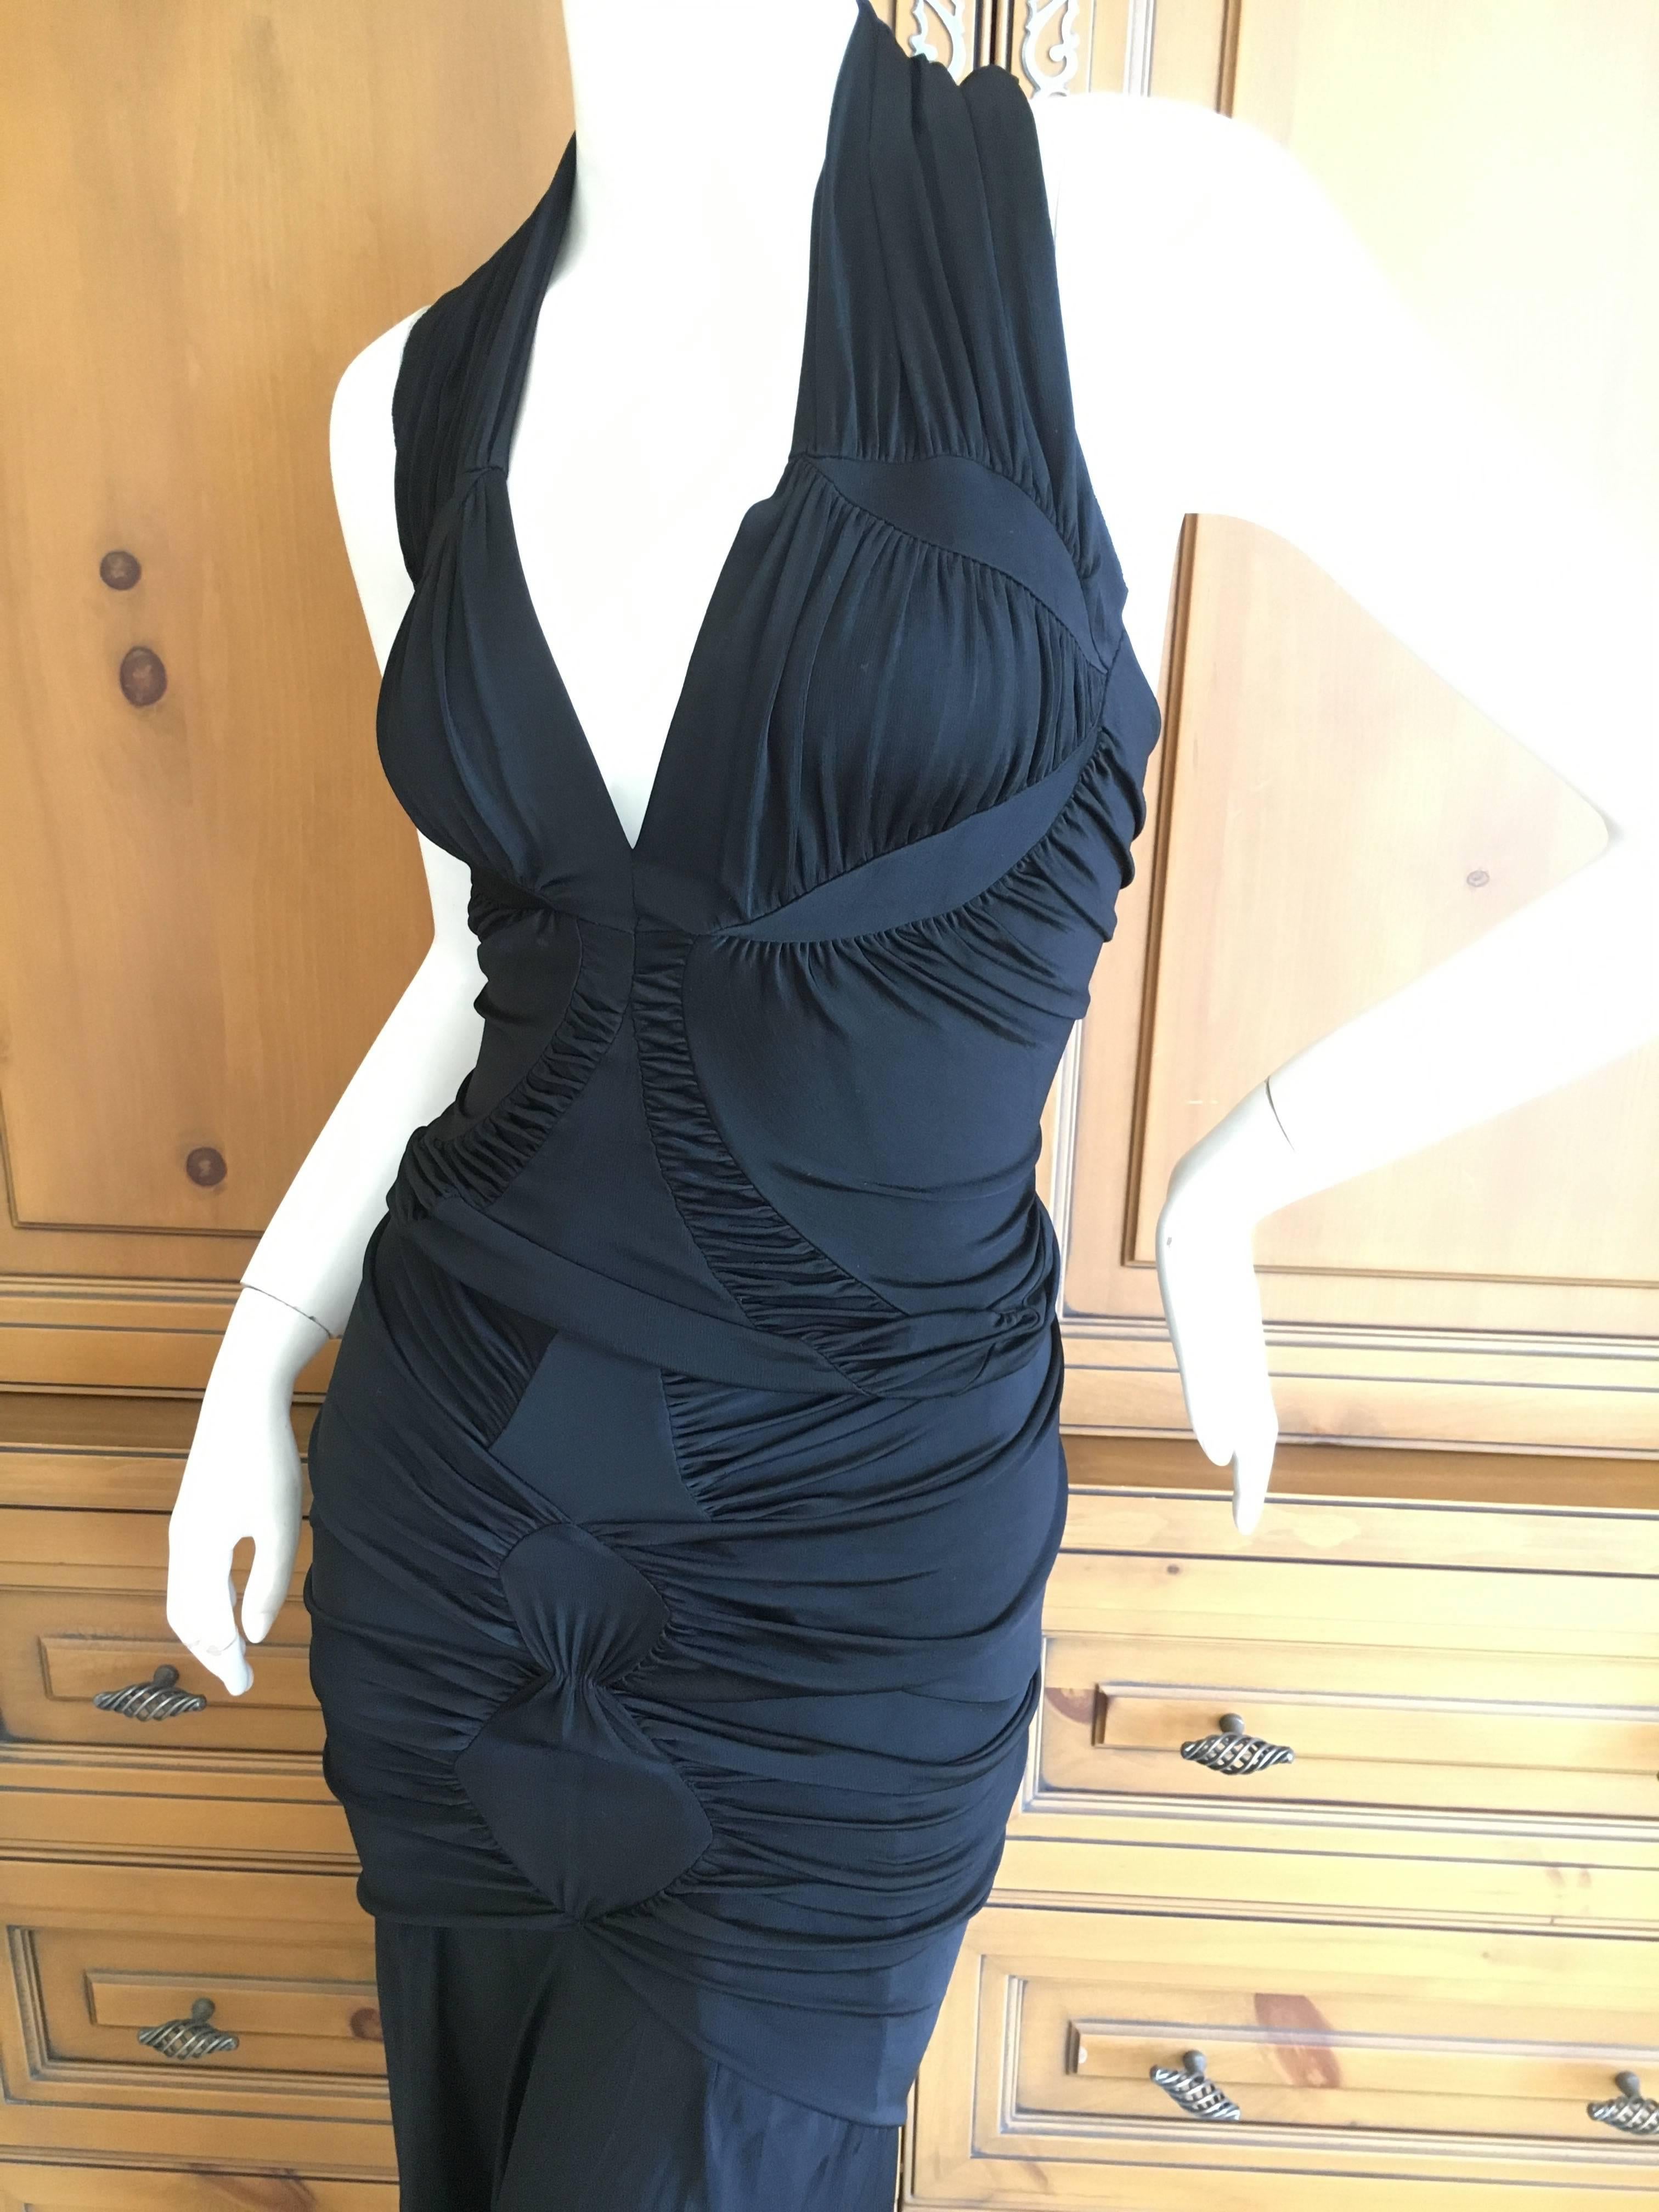 Yves Saint Laurent by Tom Ford Black Two Piece Cocktail Dress For Sale 5